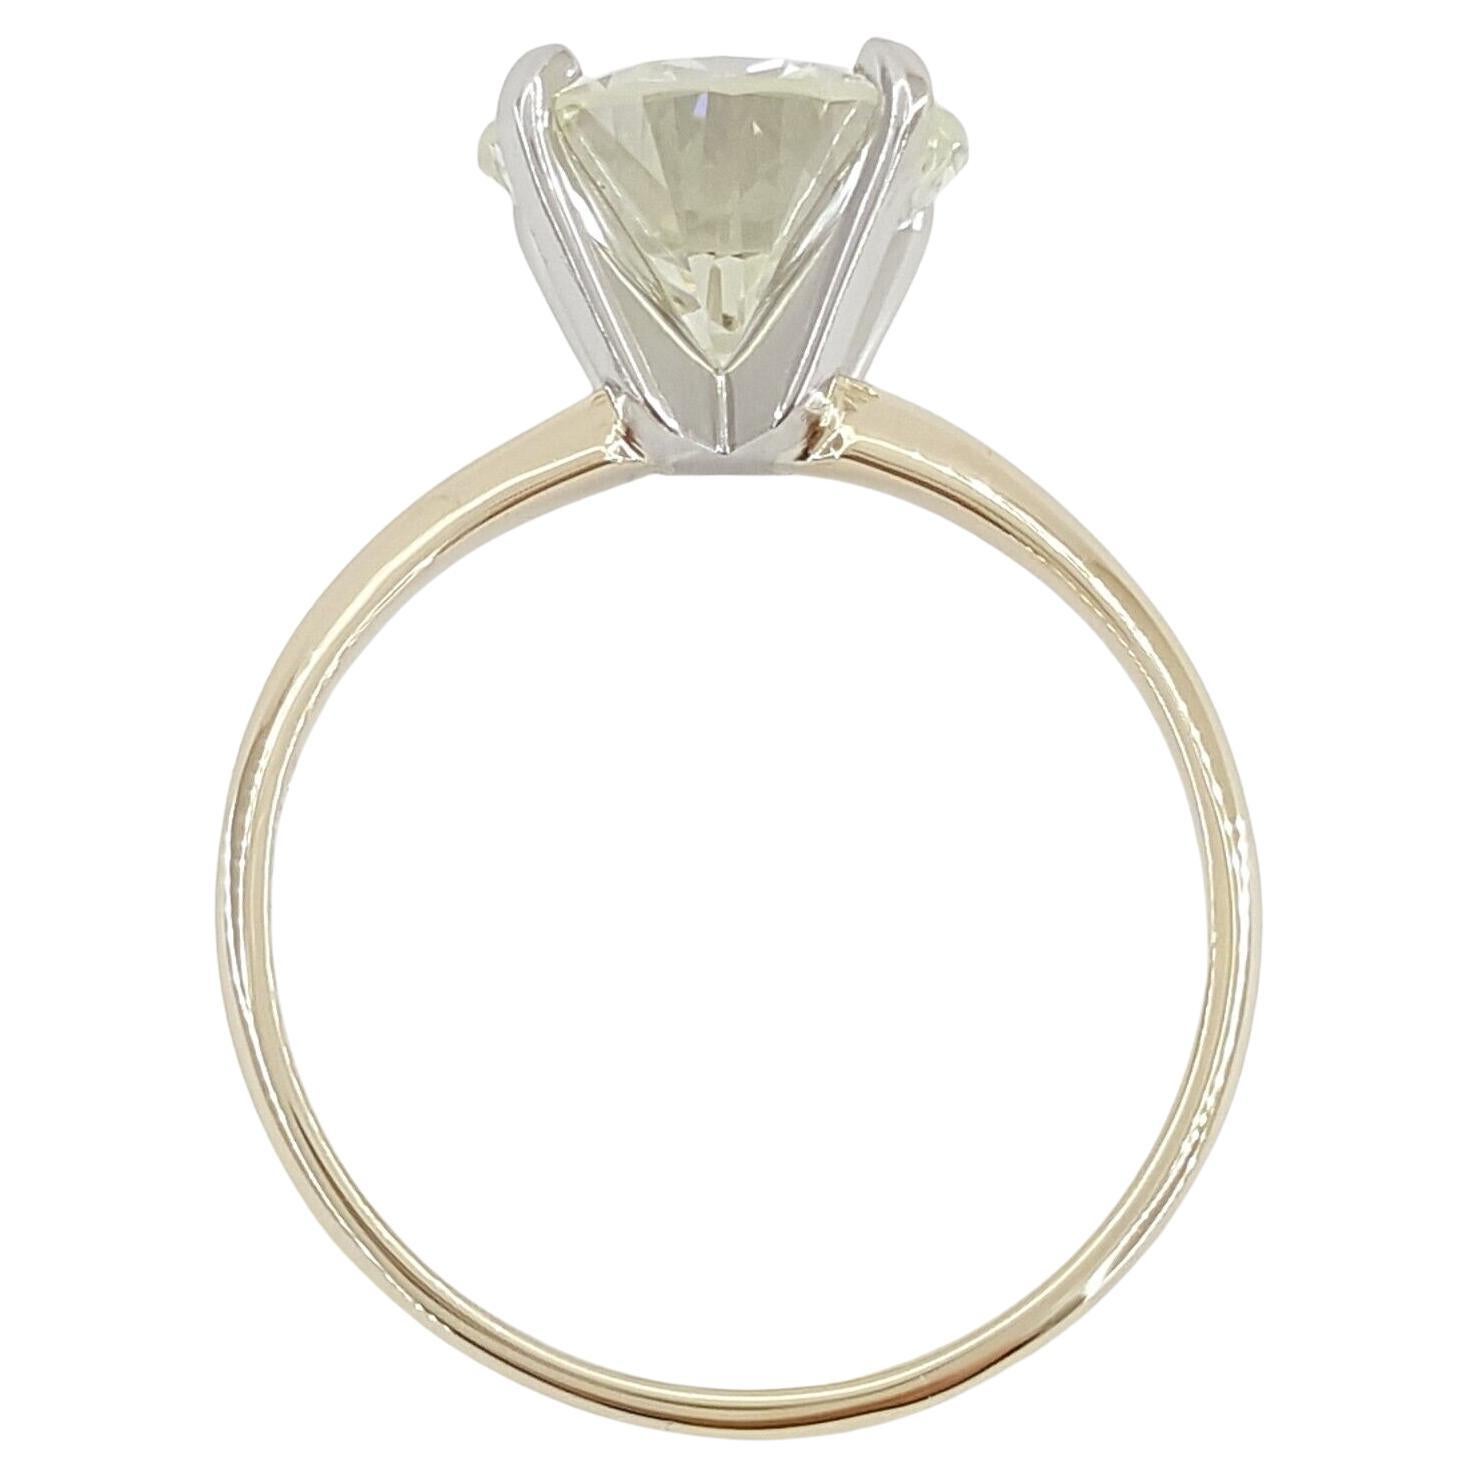  exquisite 14K Yellow Gold & Platinum Solitaire Engagement Ring adorned with a captivating 3.04 carat Round Brilliant Cut Diamond, destined to symbolize everlasting love and commitment.

This elegant ring, weighing 3 grams and sized at 7, features a